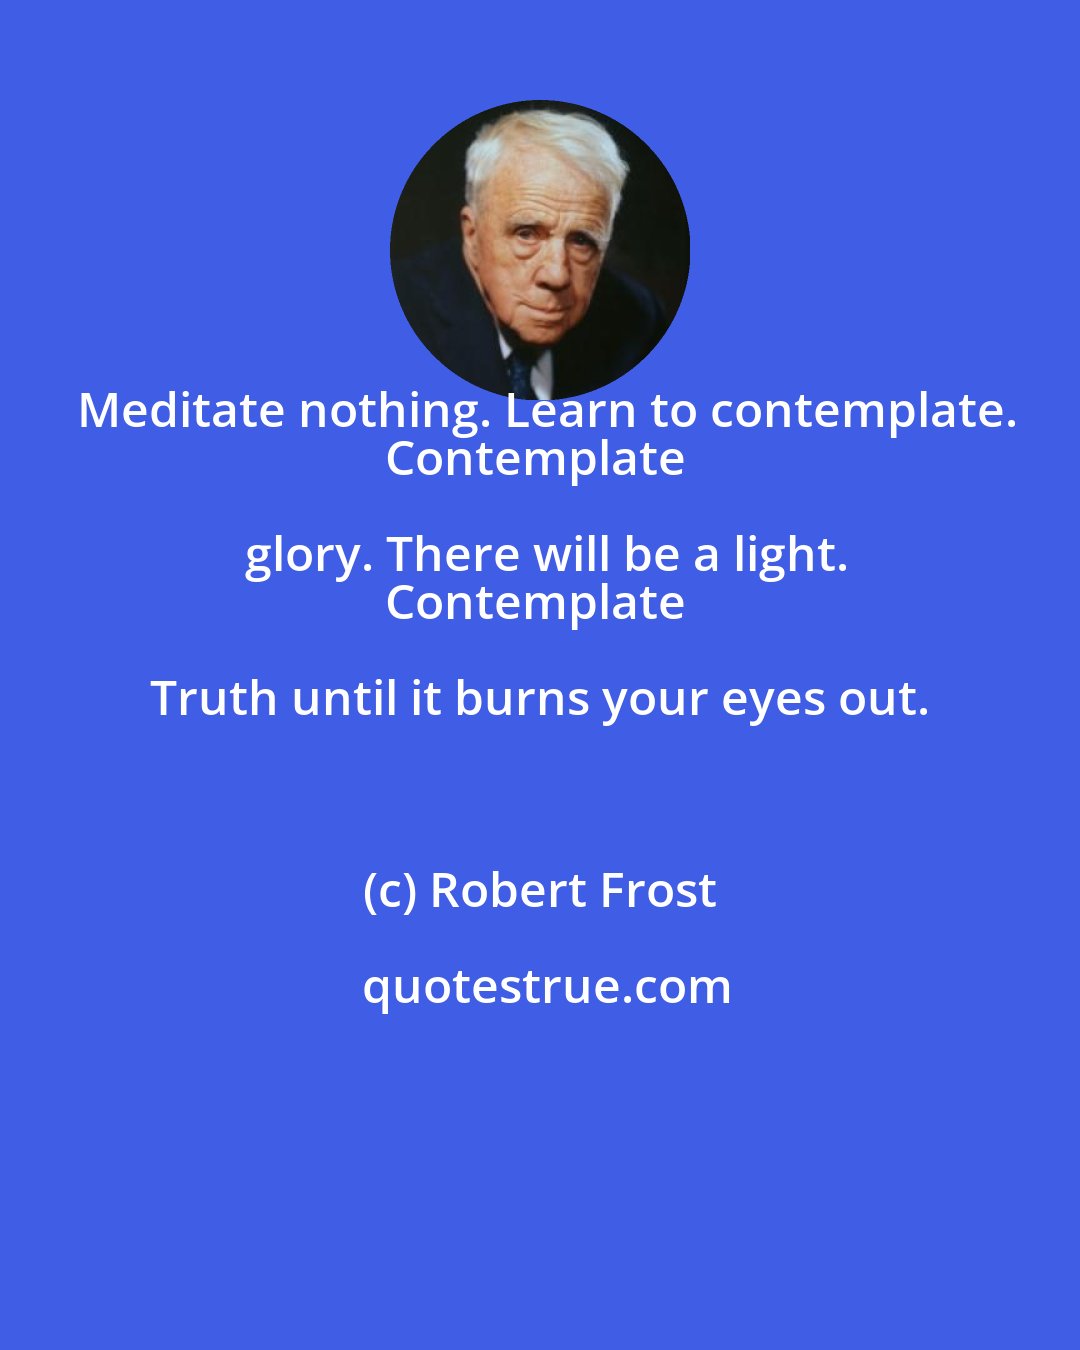 Robert Frost: Meditate nothing. Learn to contemplate.
Contemplate glory. There will be a light.
Contemplate Truth until it burns your eyes out.